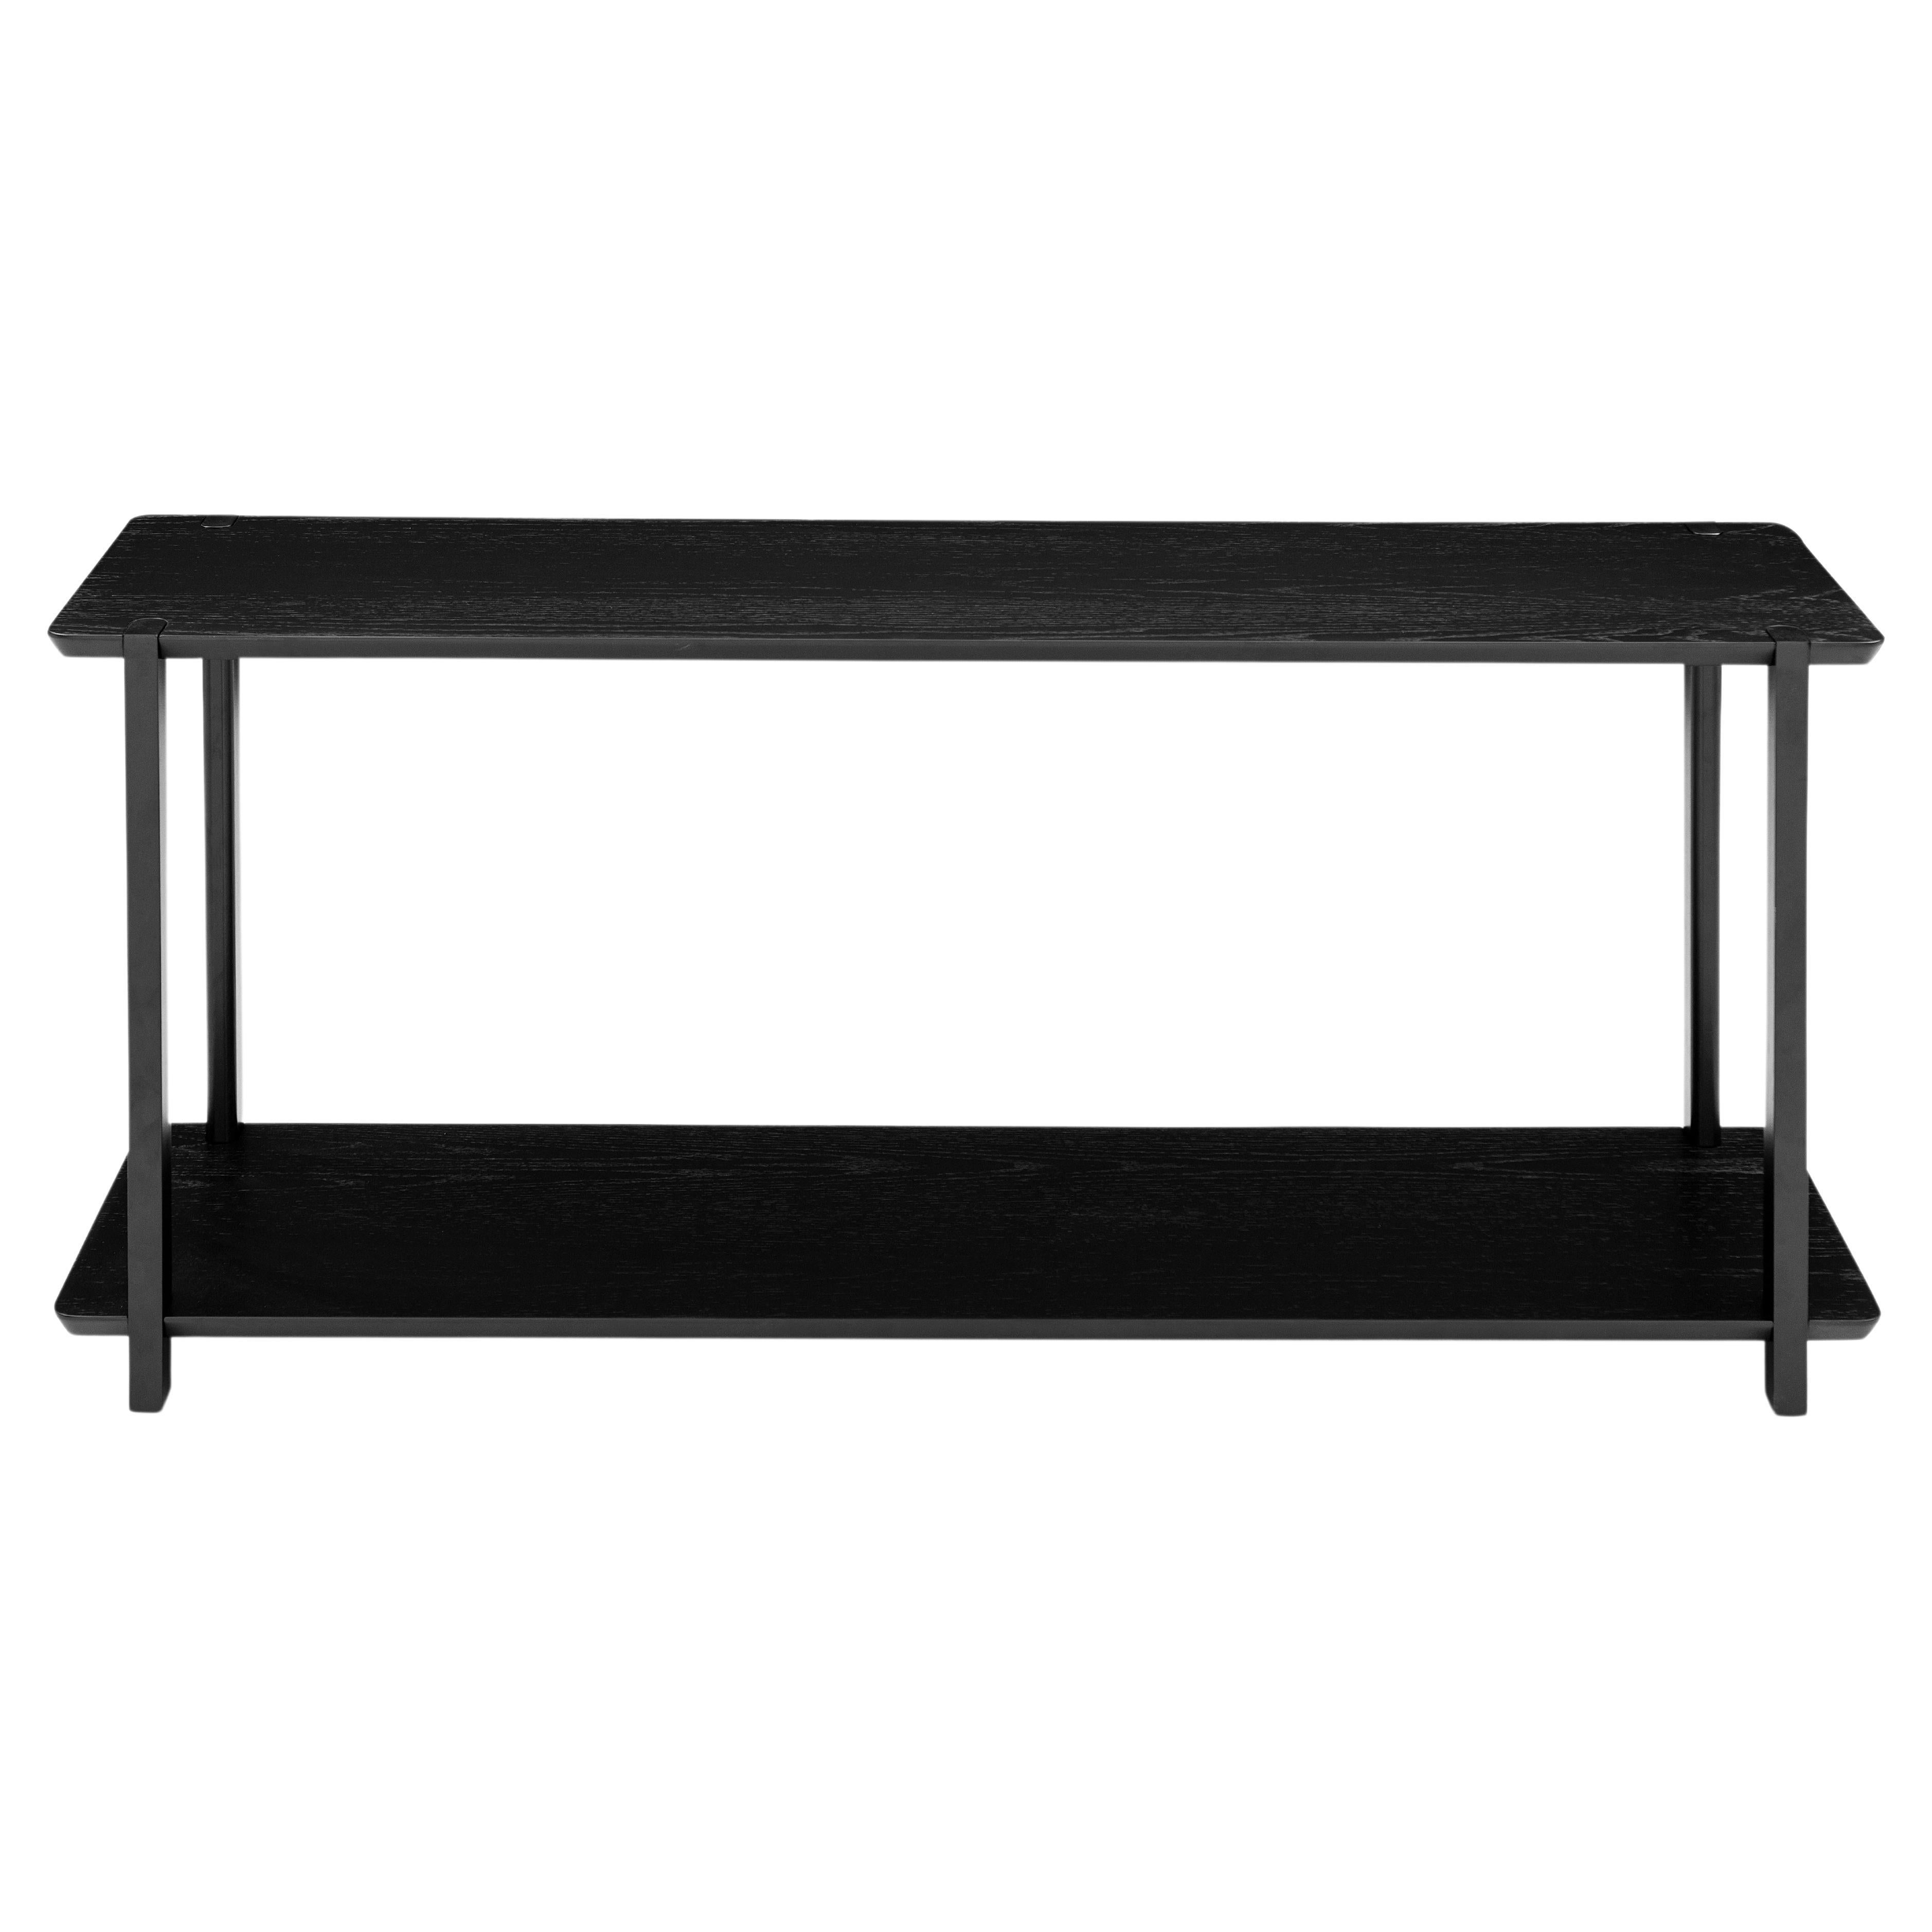 Clan Console Table in Black Wood Finish 63''